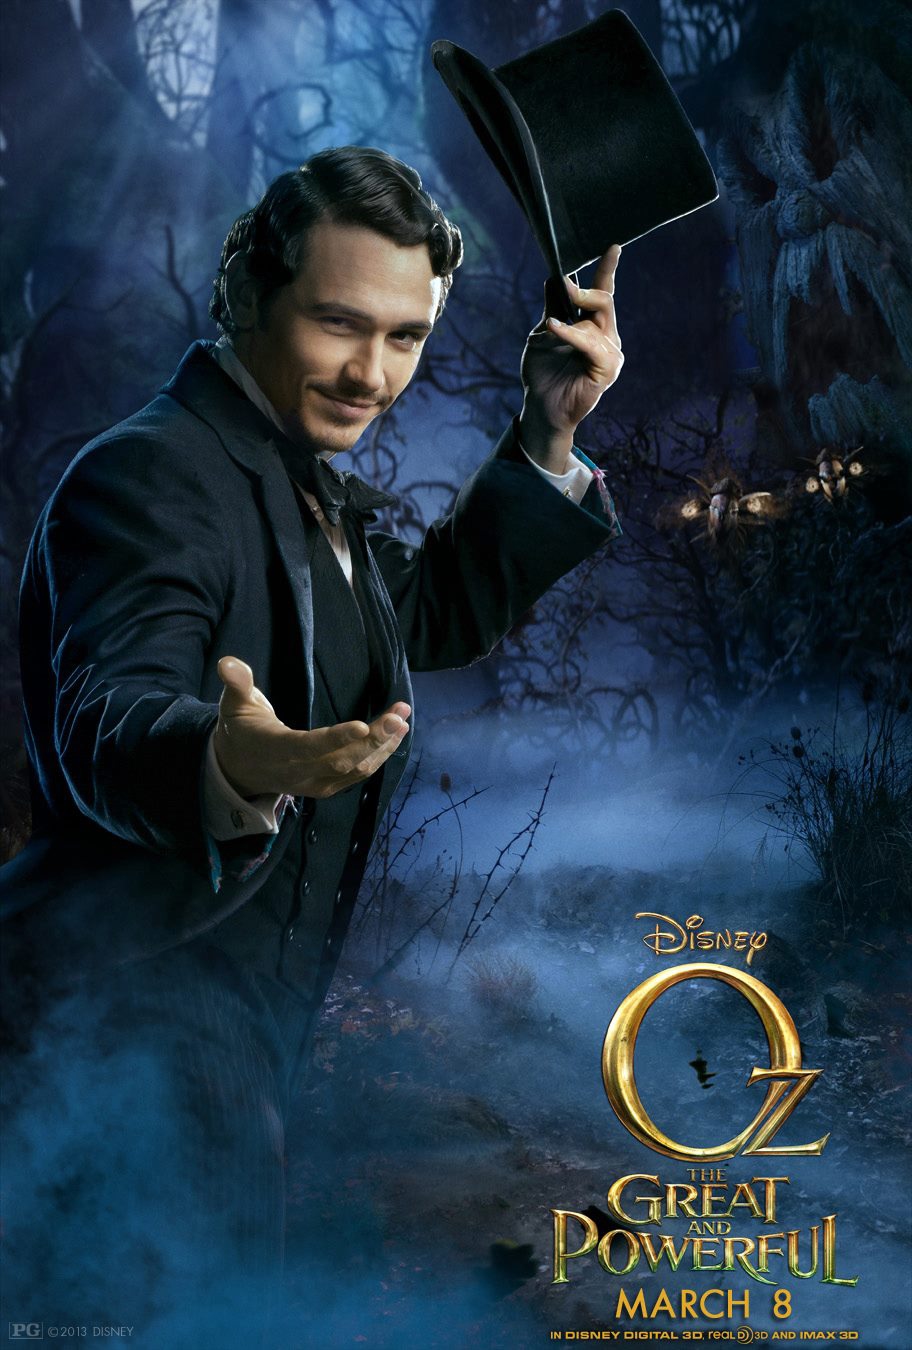 Oz the Great and Powerful - Movie Poster #8 (Original)